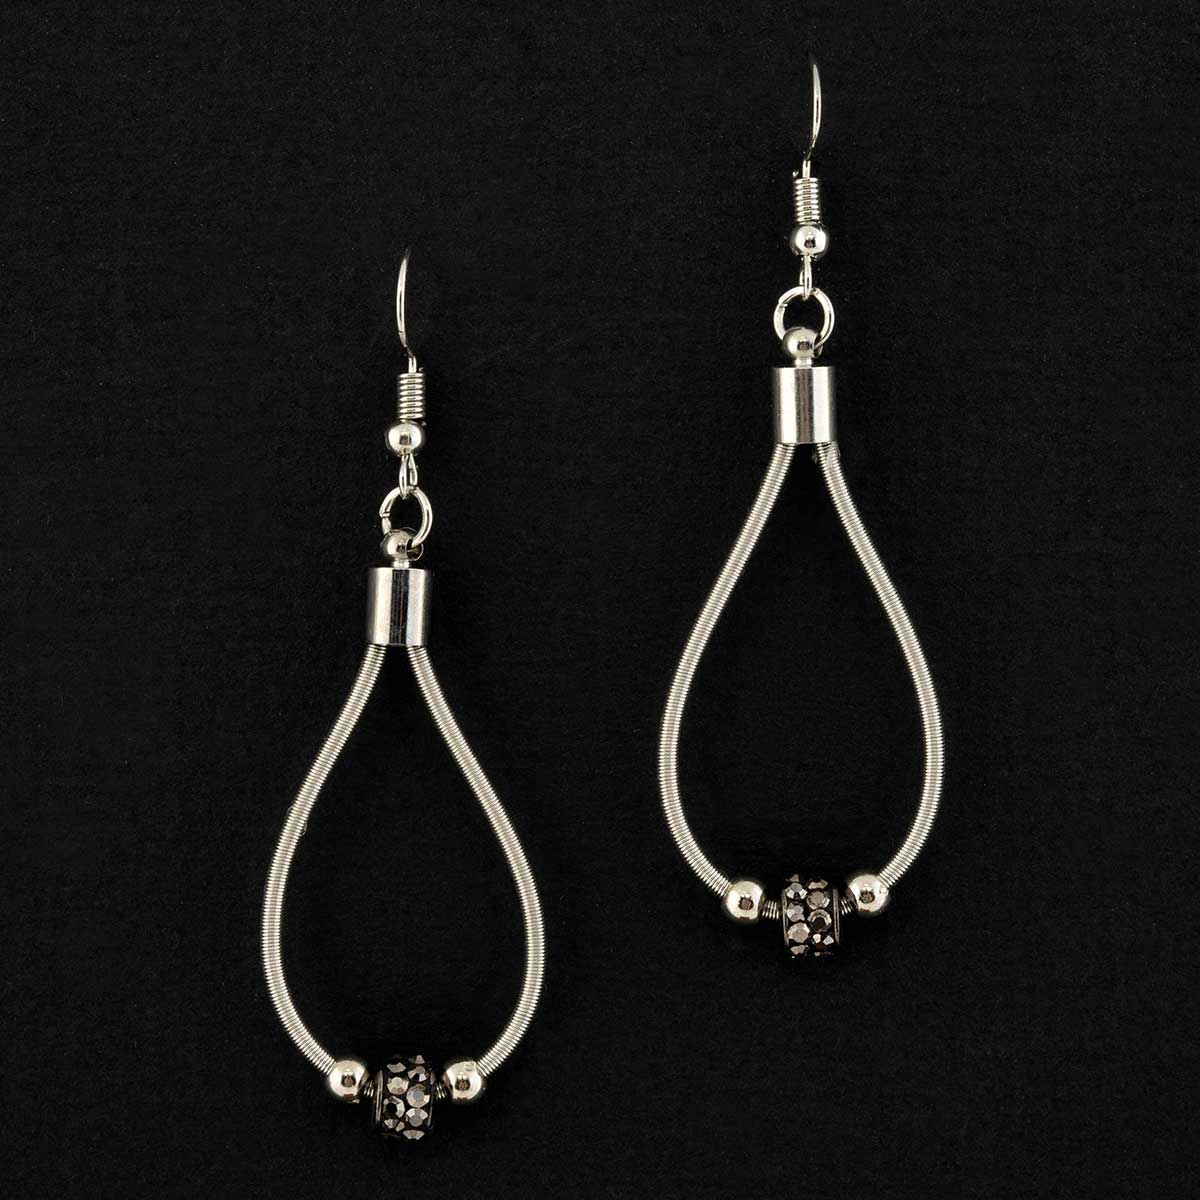 Gunmetal Coil French Wire Dangle Earrings with Black Beads .75"